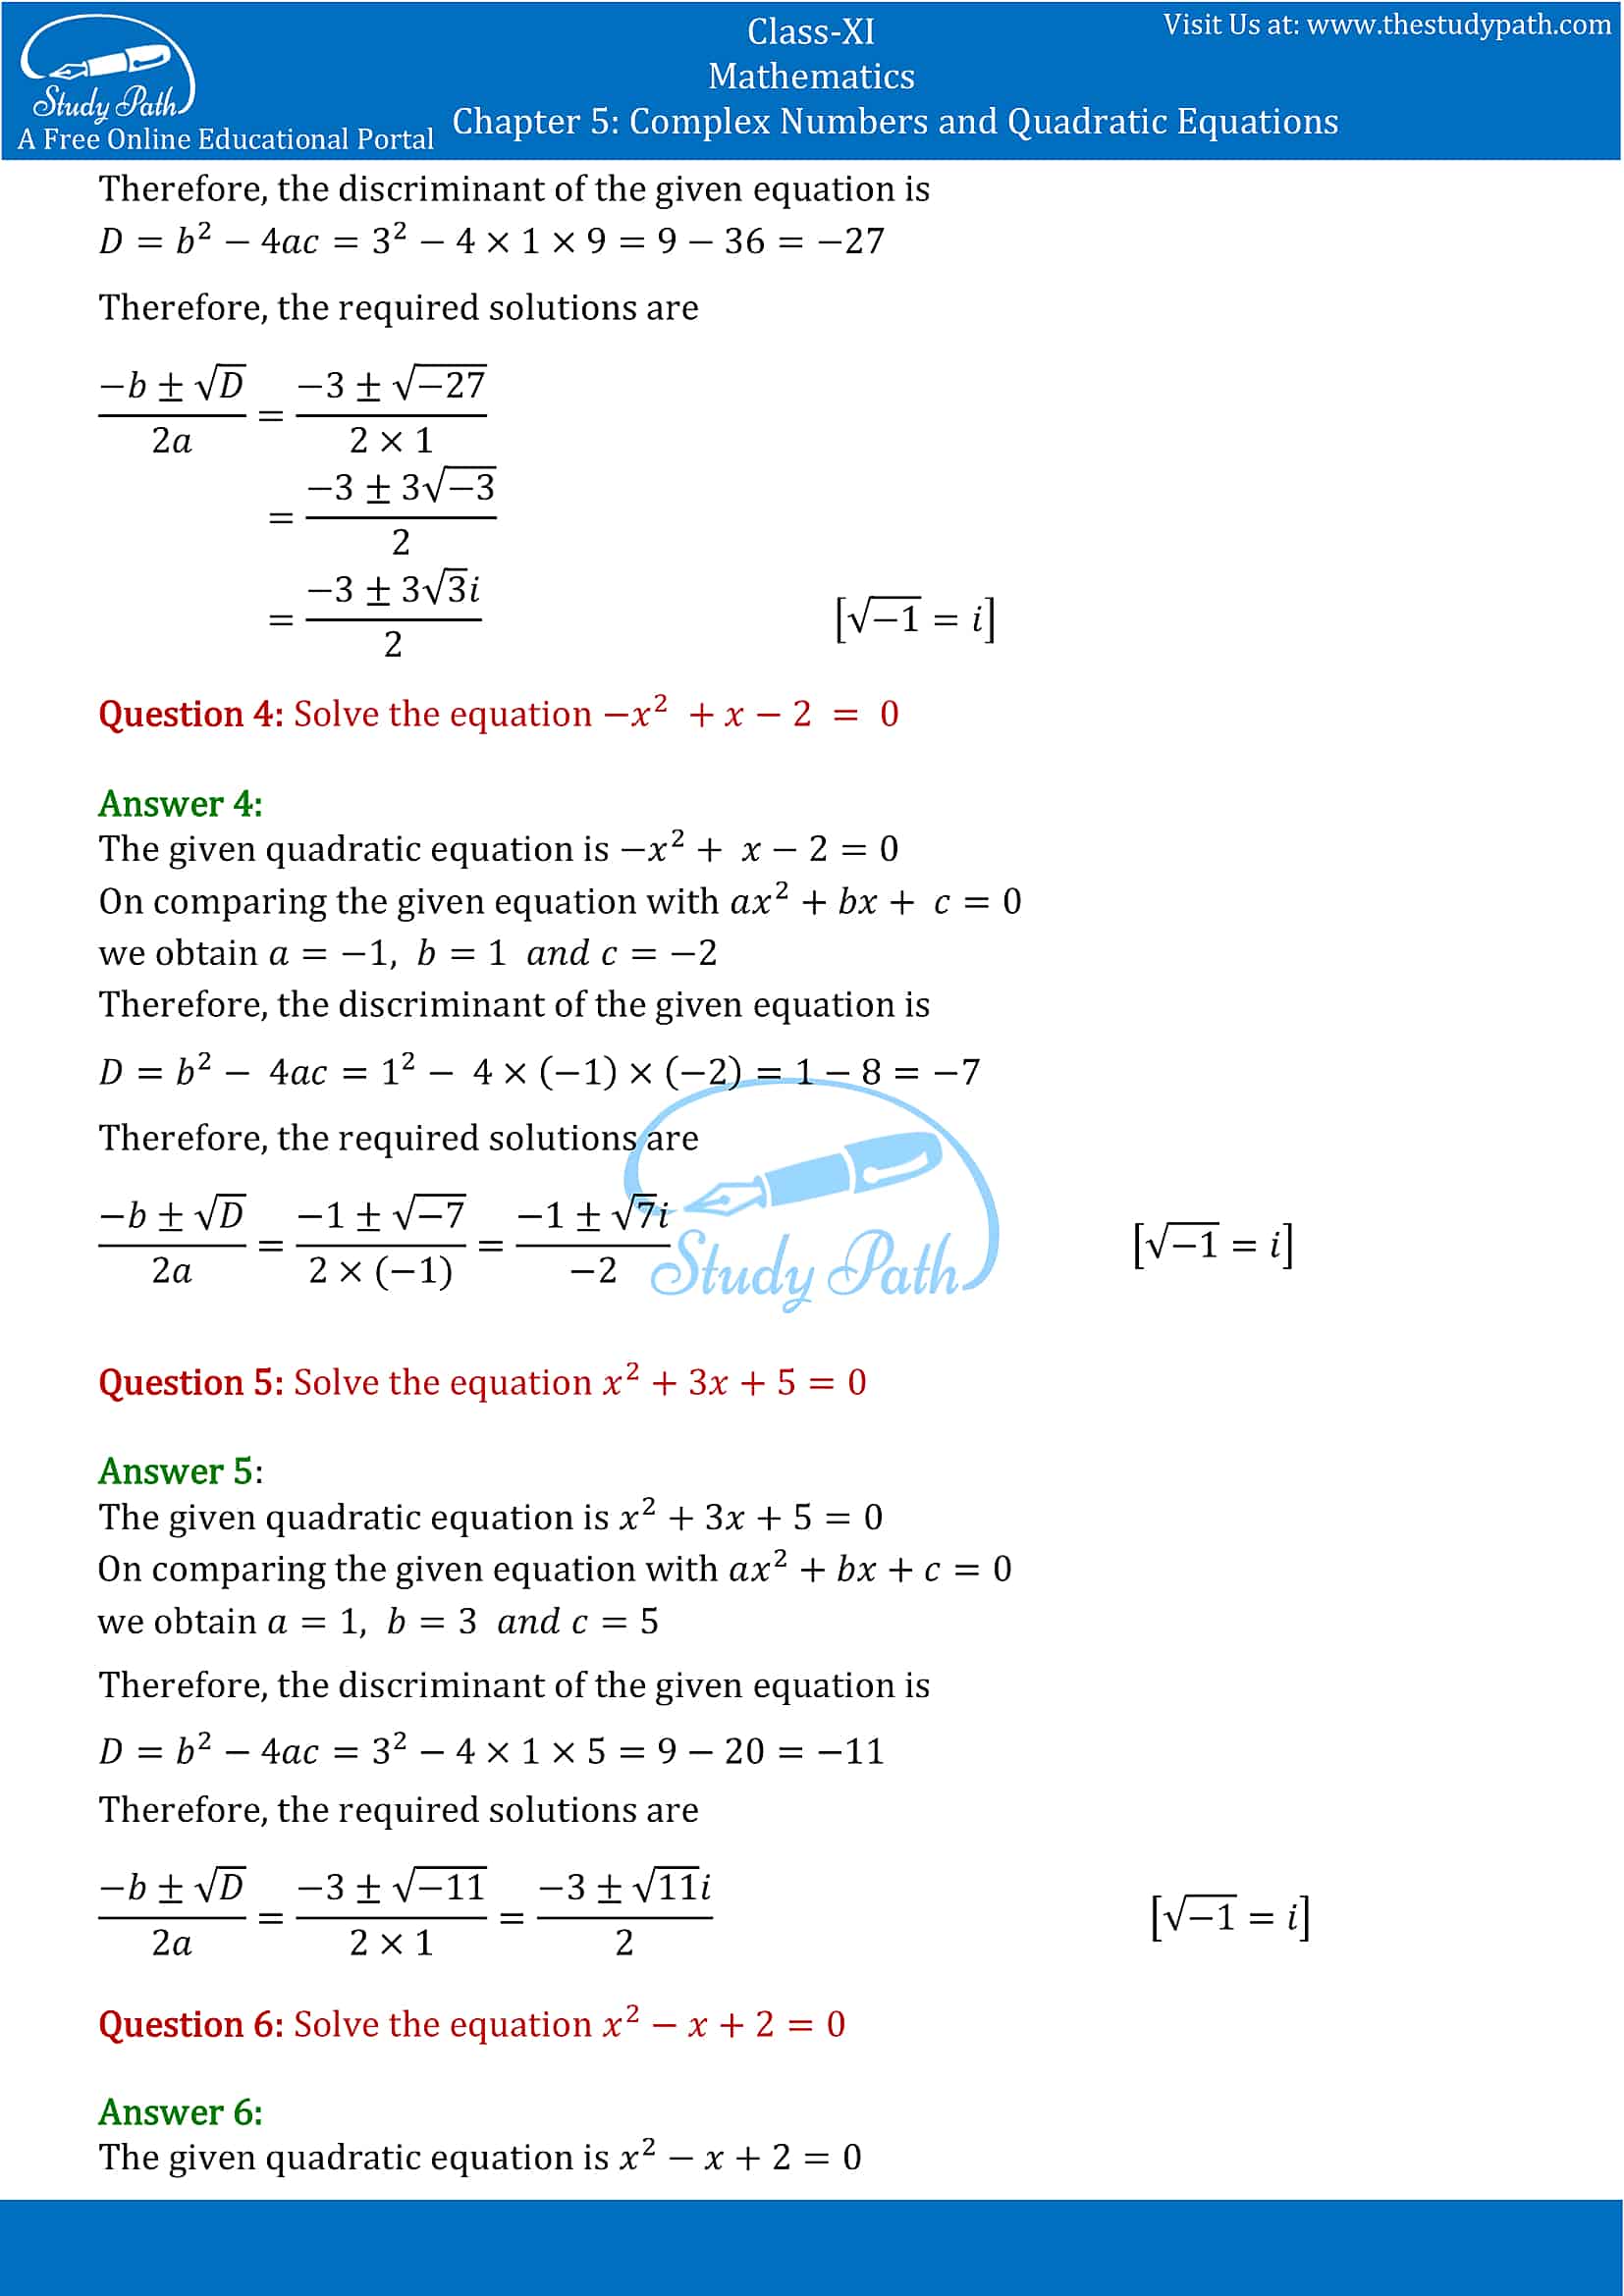 NCERT Solutions for Class 11 Maths chapter 5 Complex Numbers and Quadratic Equations Exercise 5.3 part-2